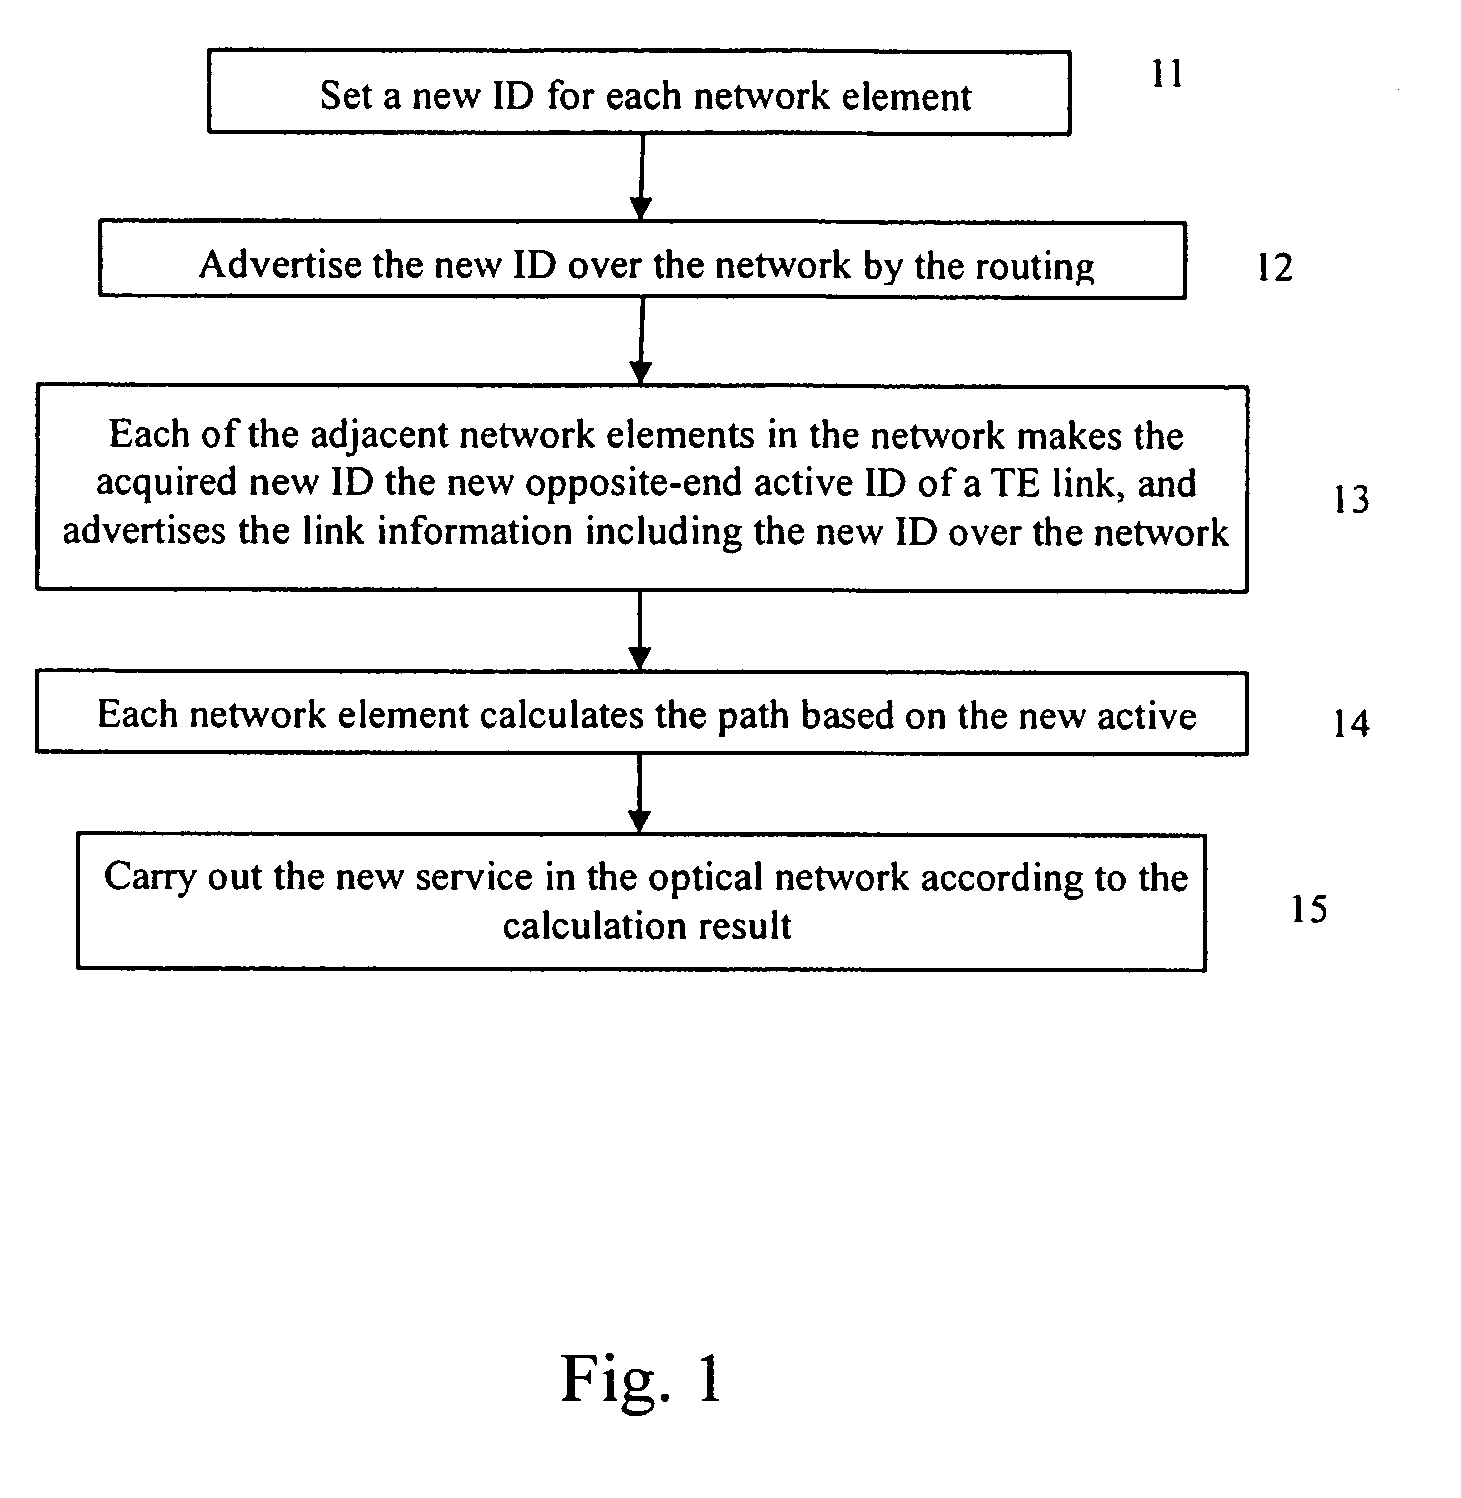 Method for implementing services on a network element based on multiple IDs